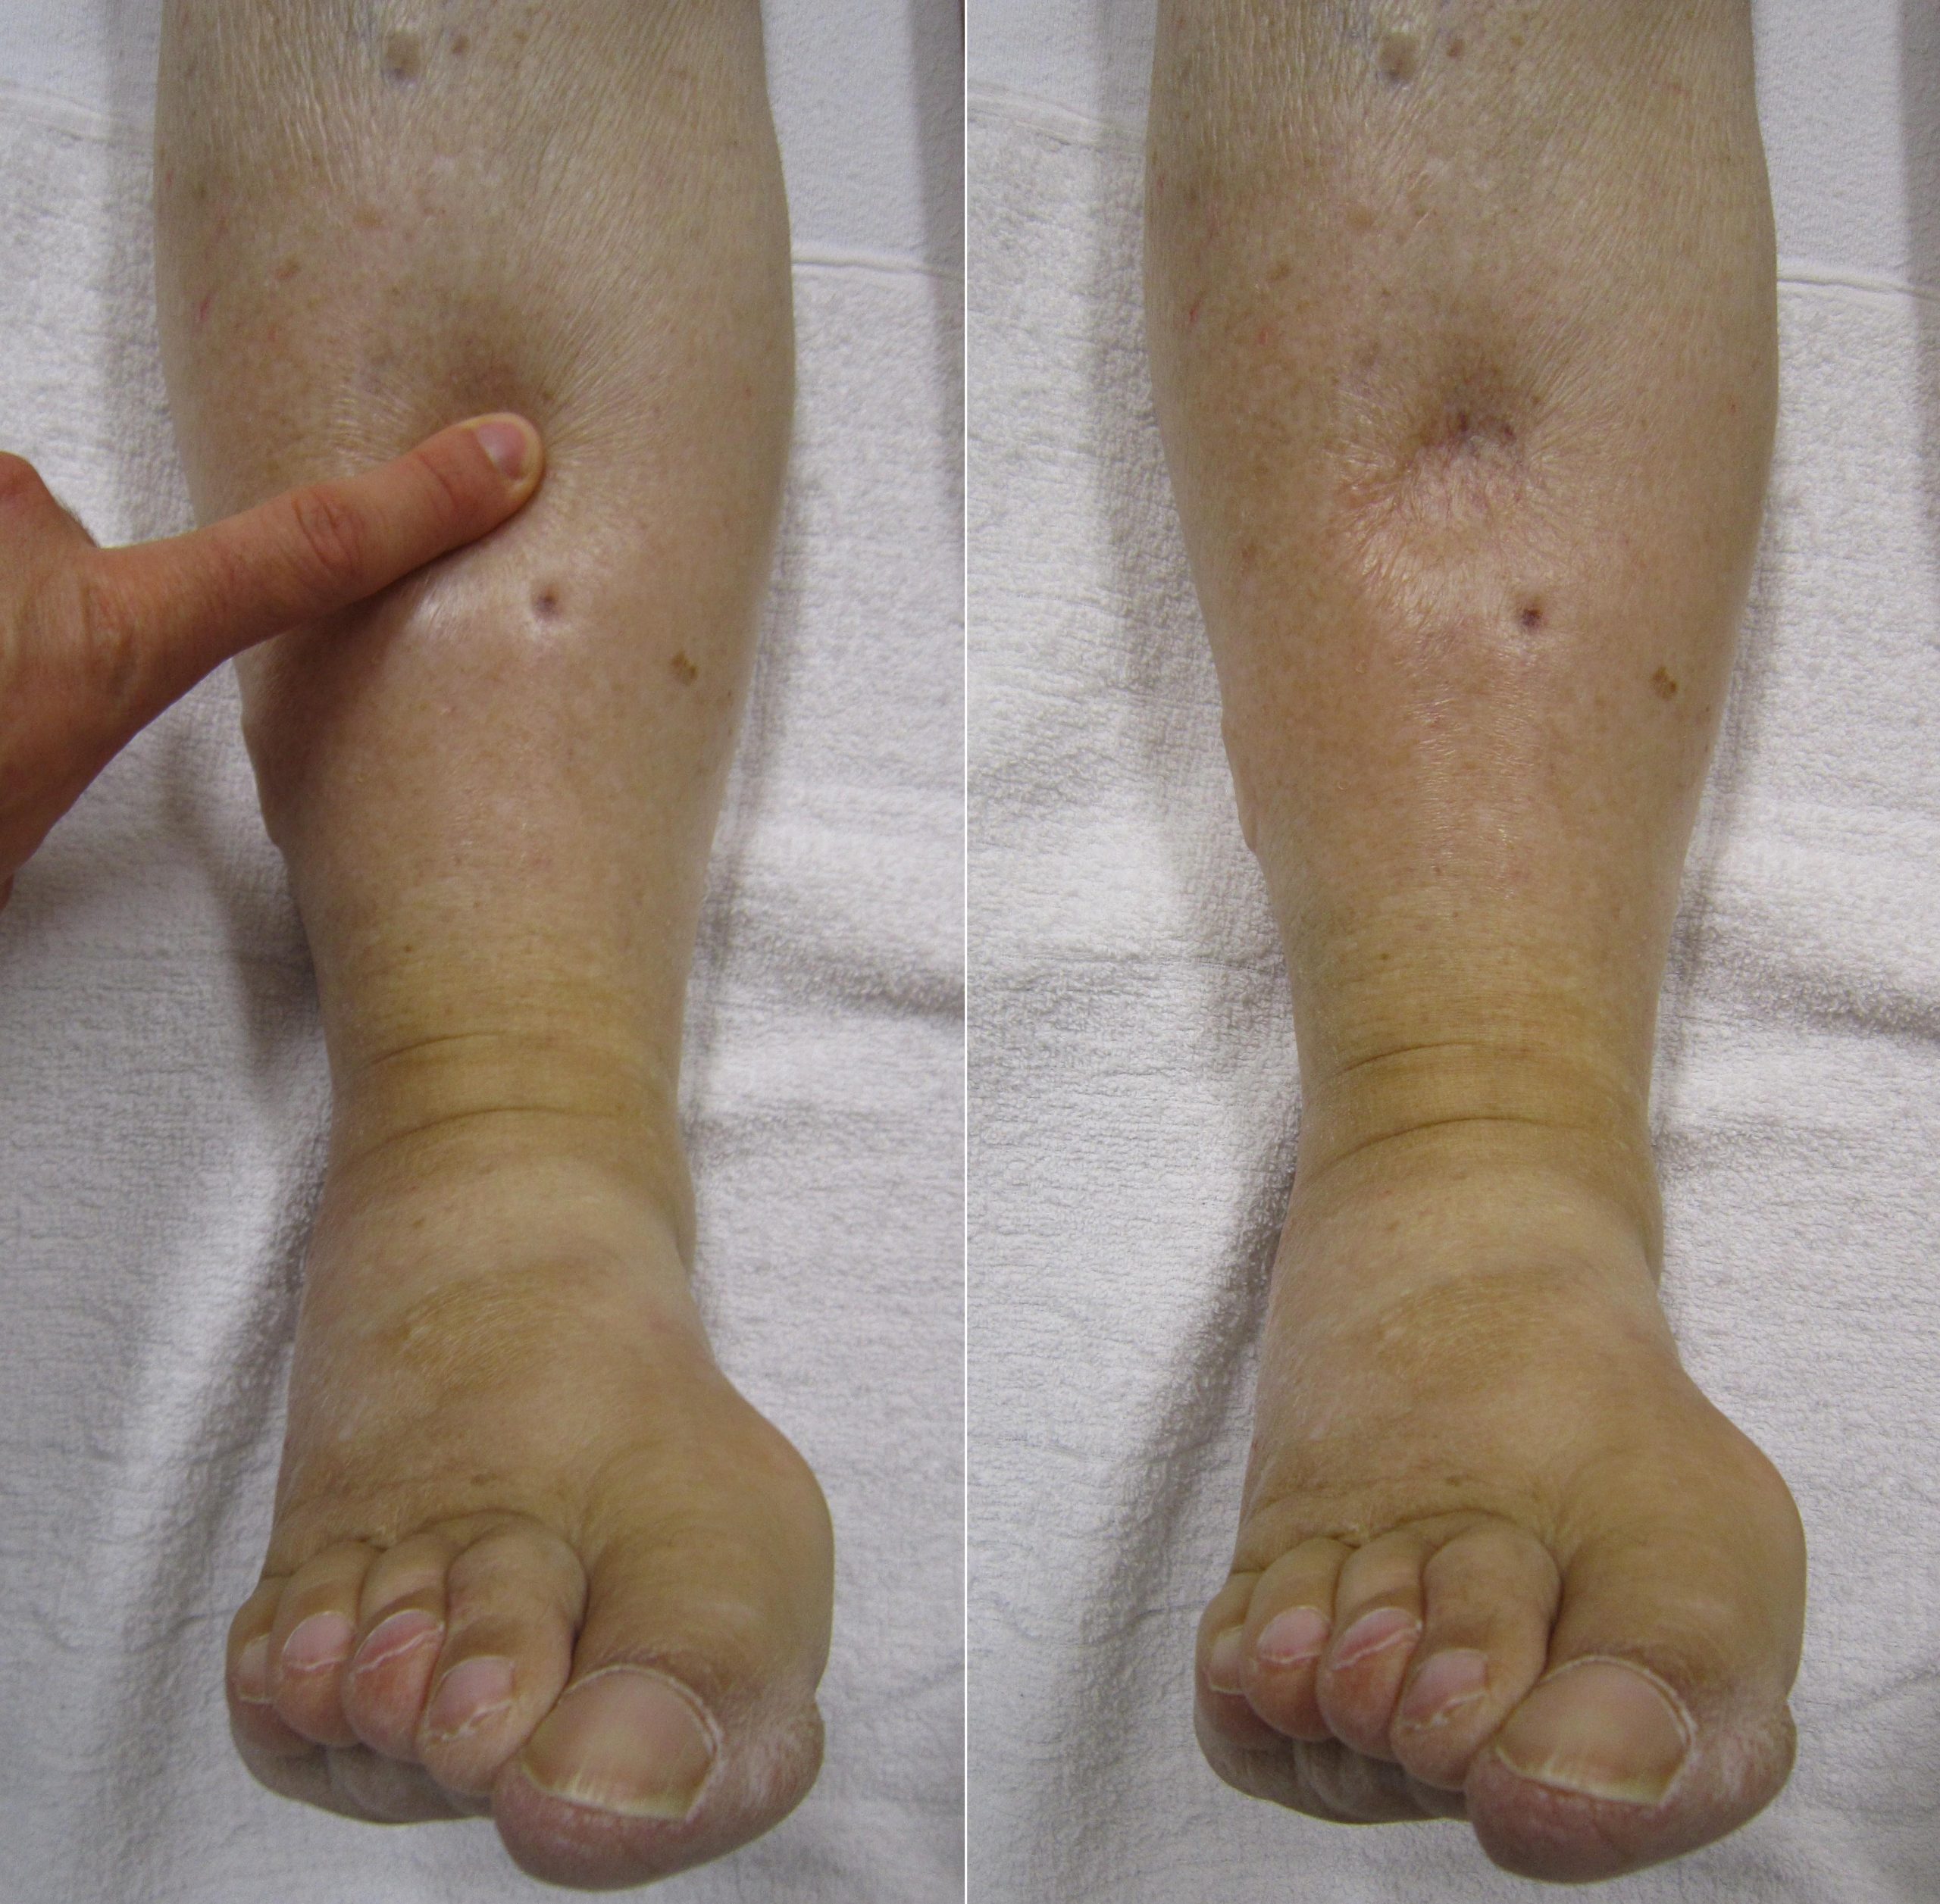 Photo showing a finger pressing into a patient's leg to assess for edema